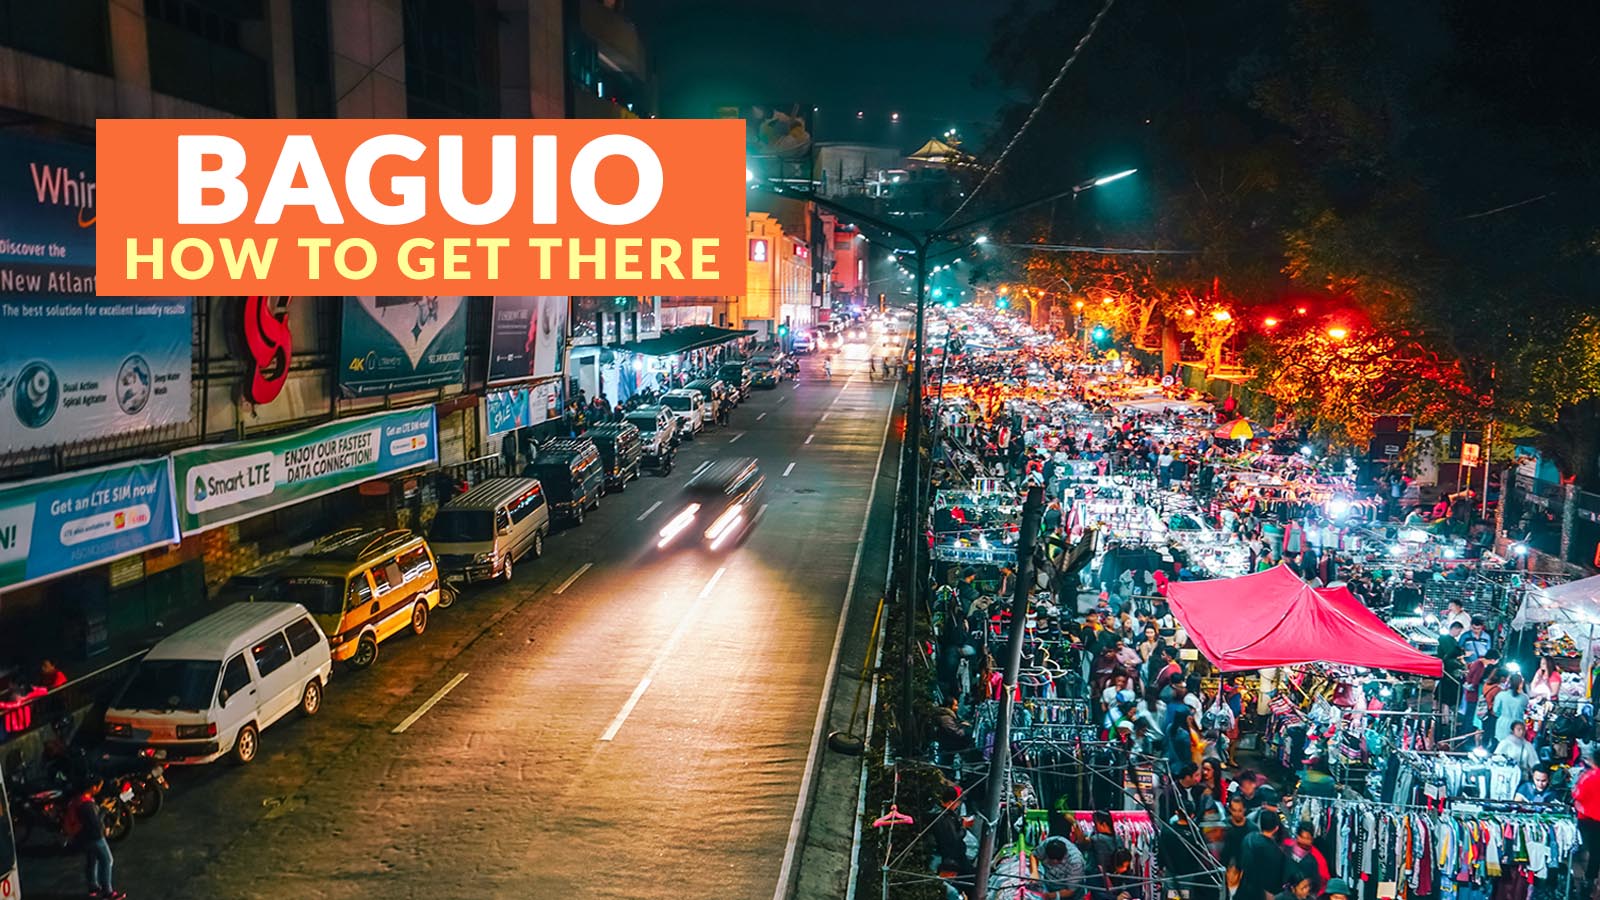 clark to baguio travel time